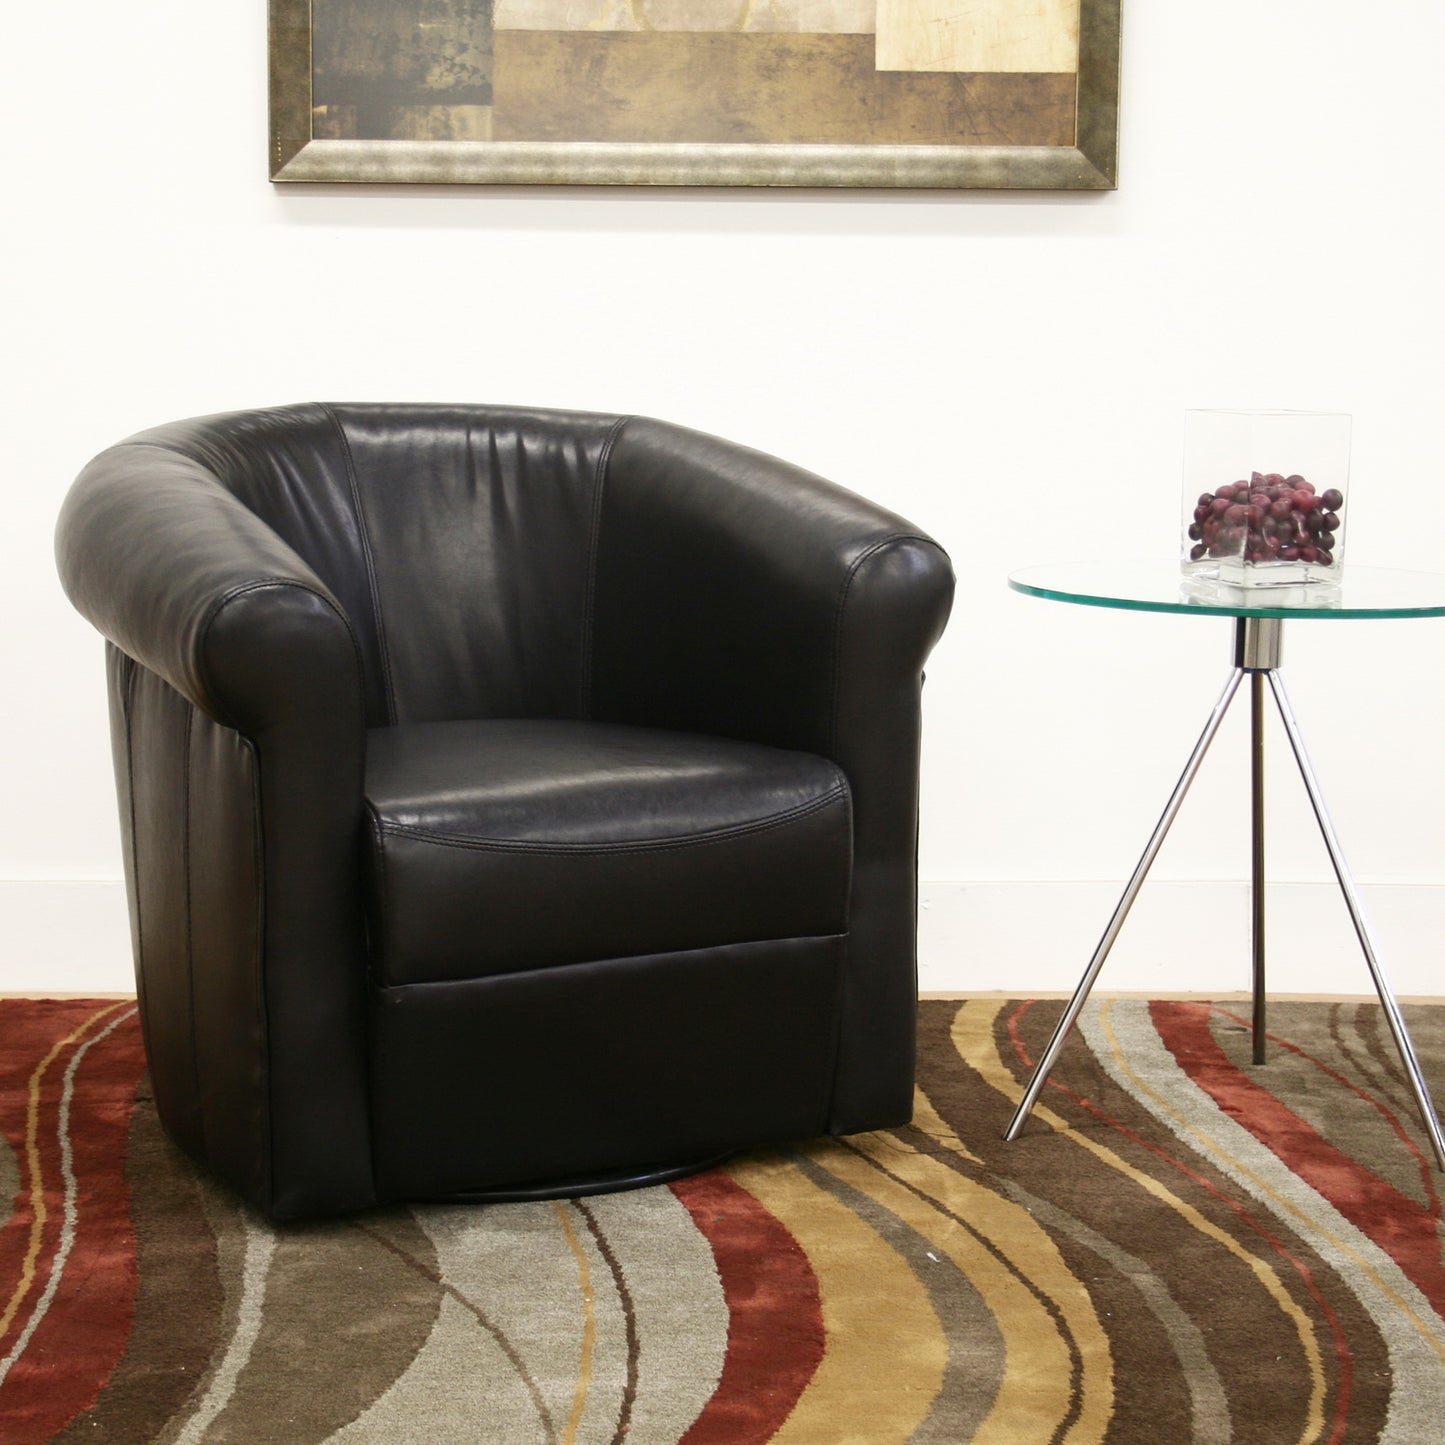 Contemporary Swivel Club Chair in Black Brown Faux Leather